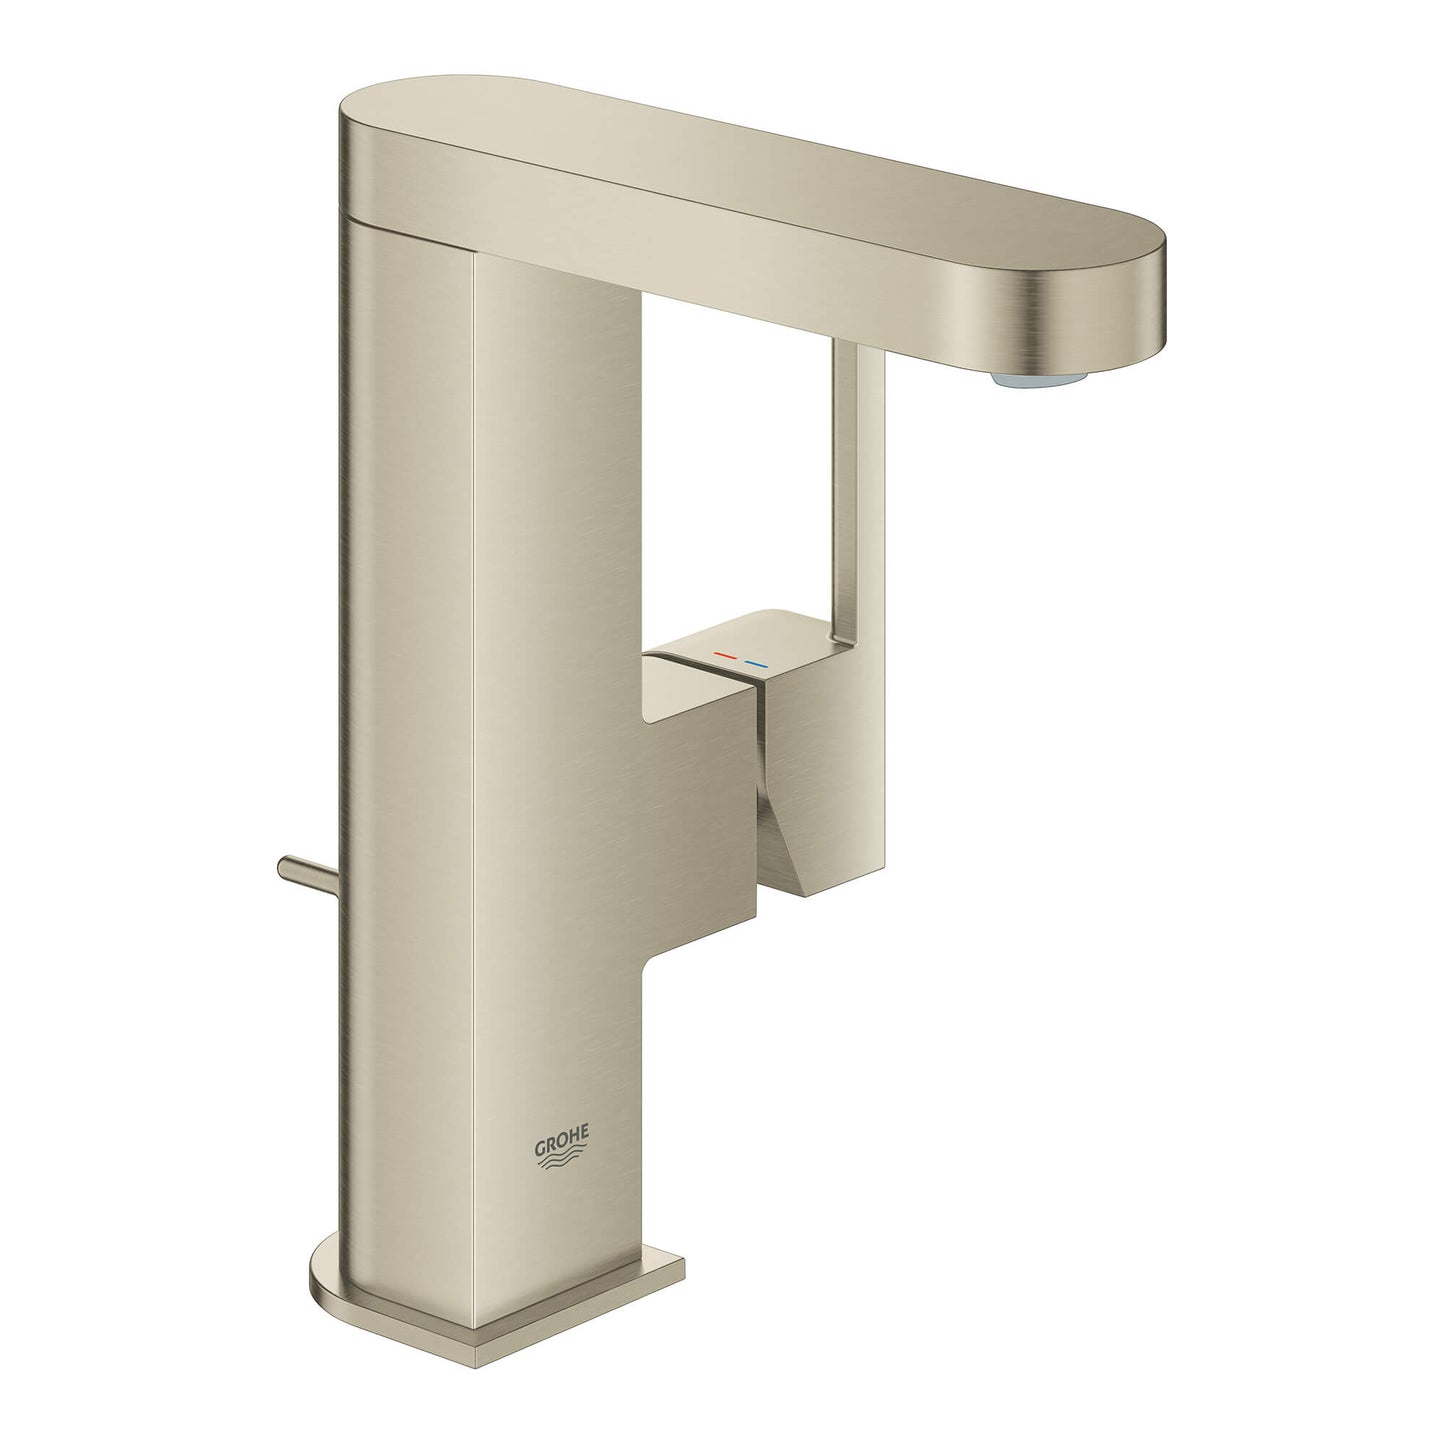 GROHE 23956EN3 Plus Brushed Nickel Single Hole Single-Handle M-Size Bathroom Faucet 1.2 GPM